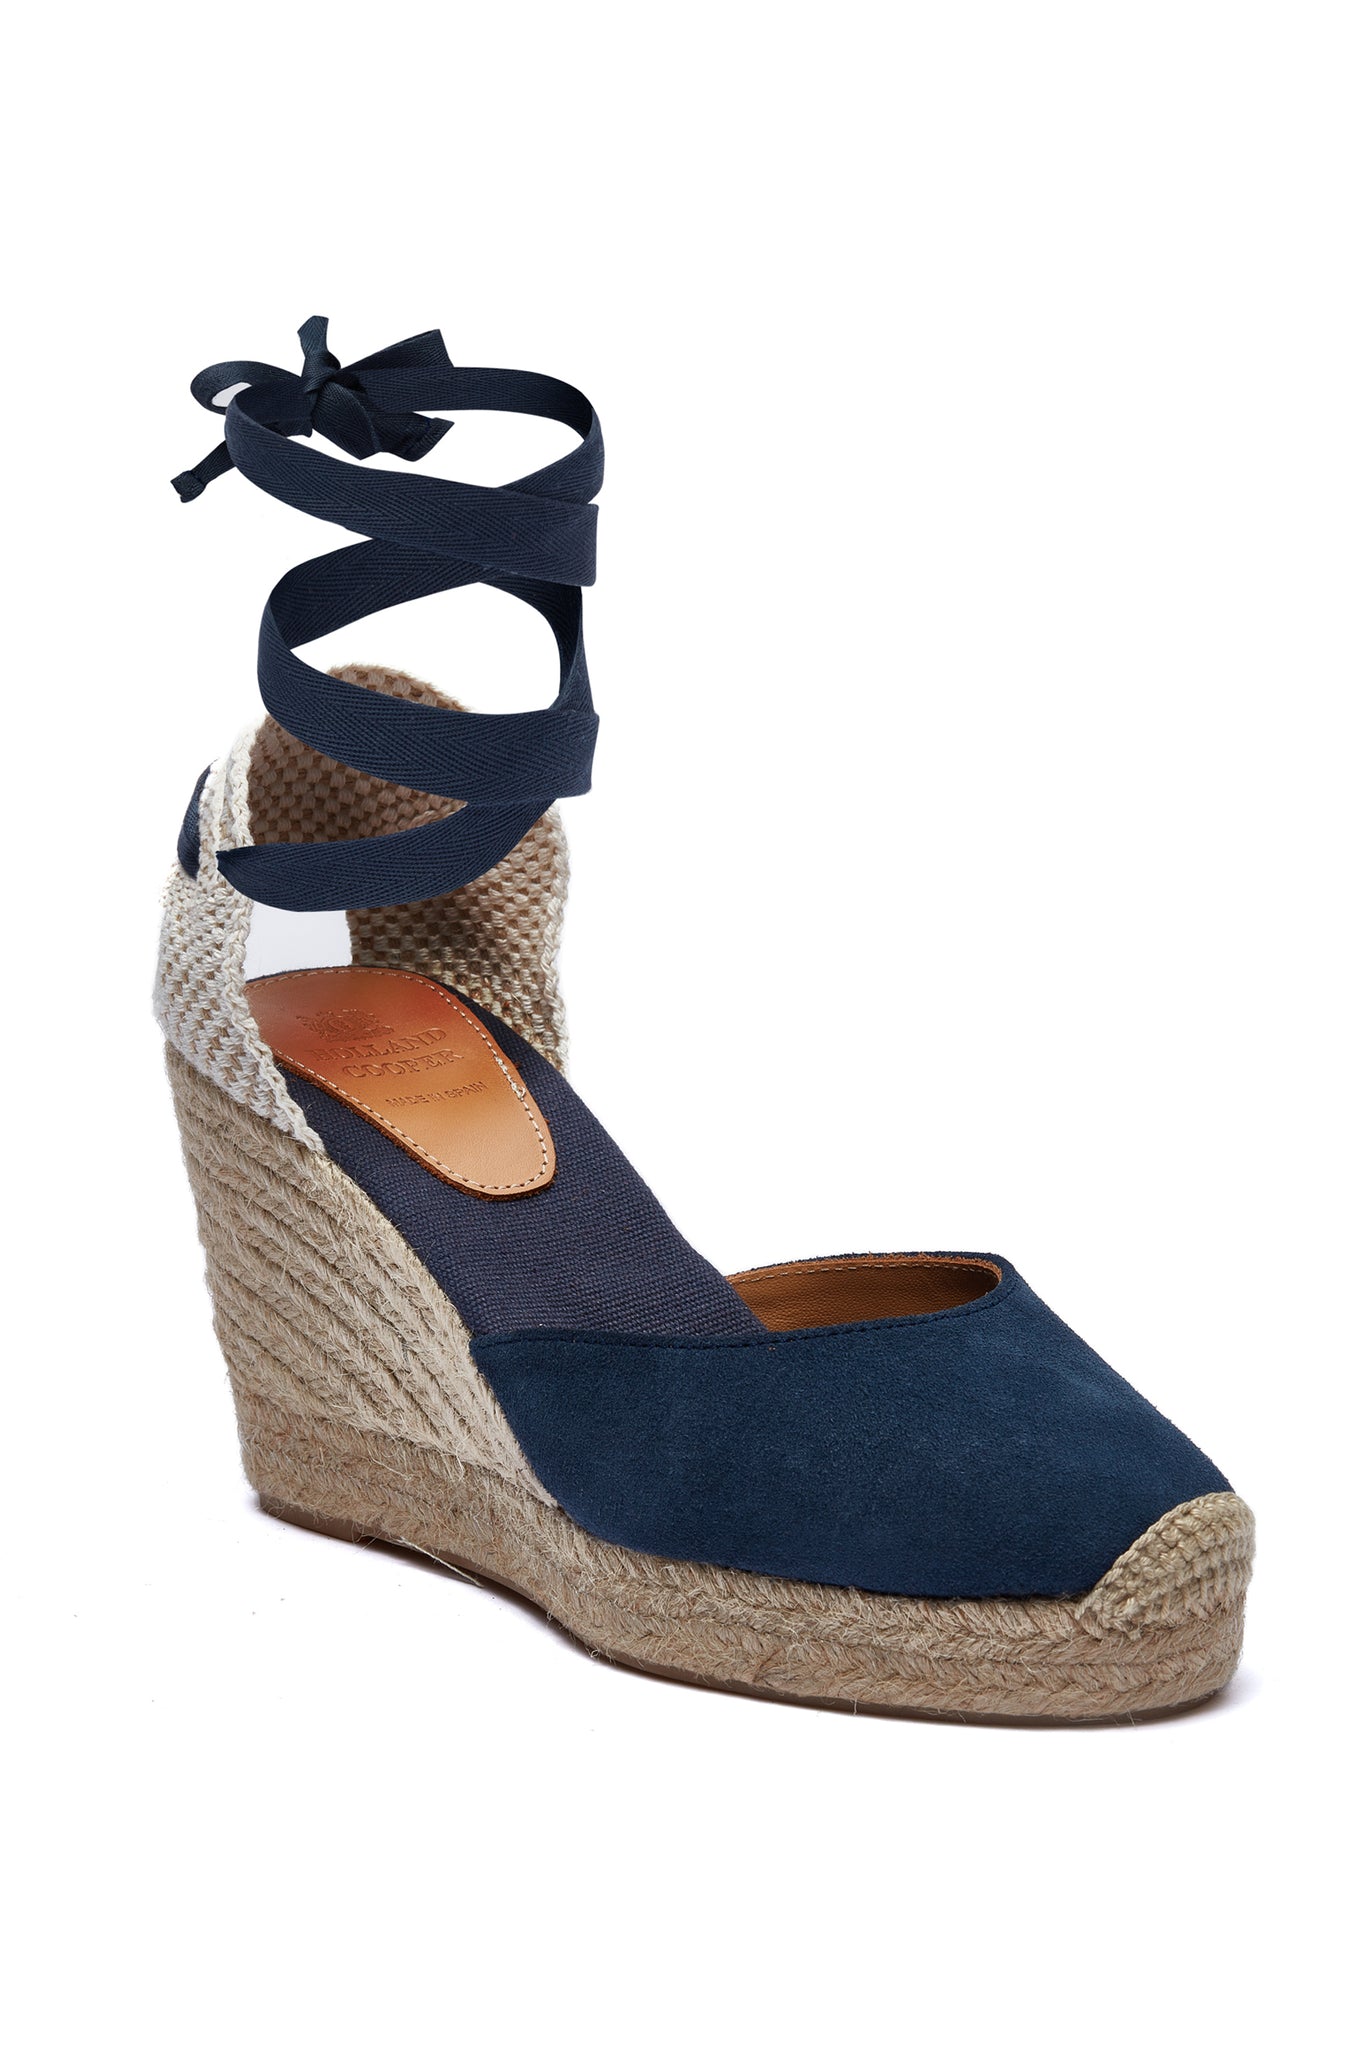 4 inch braided jute wedge heel with navy suede top and tie up navy ribbons around the ankle.